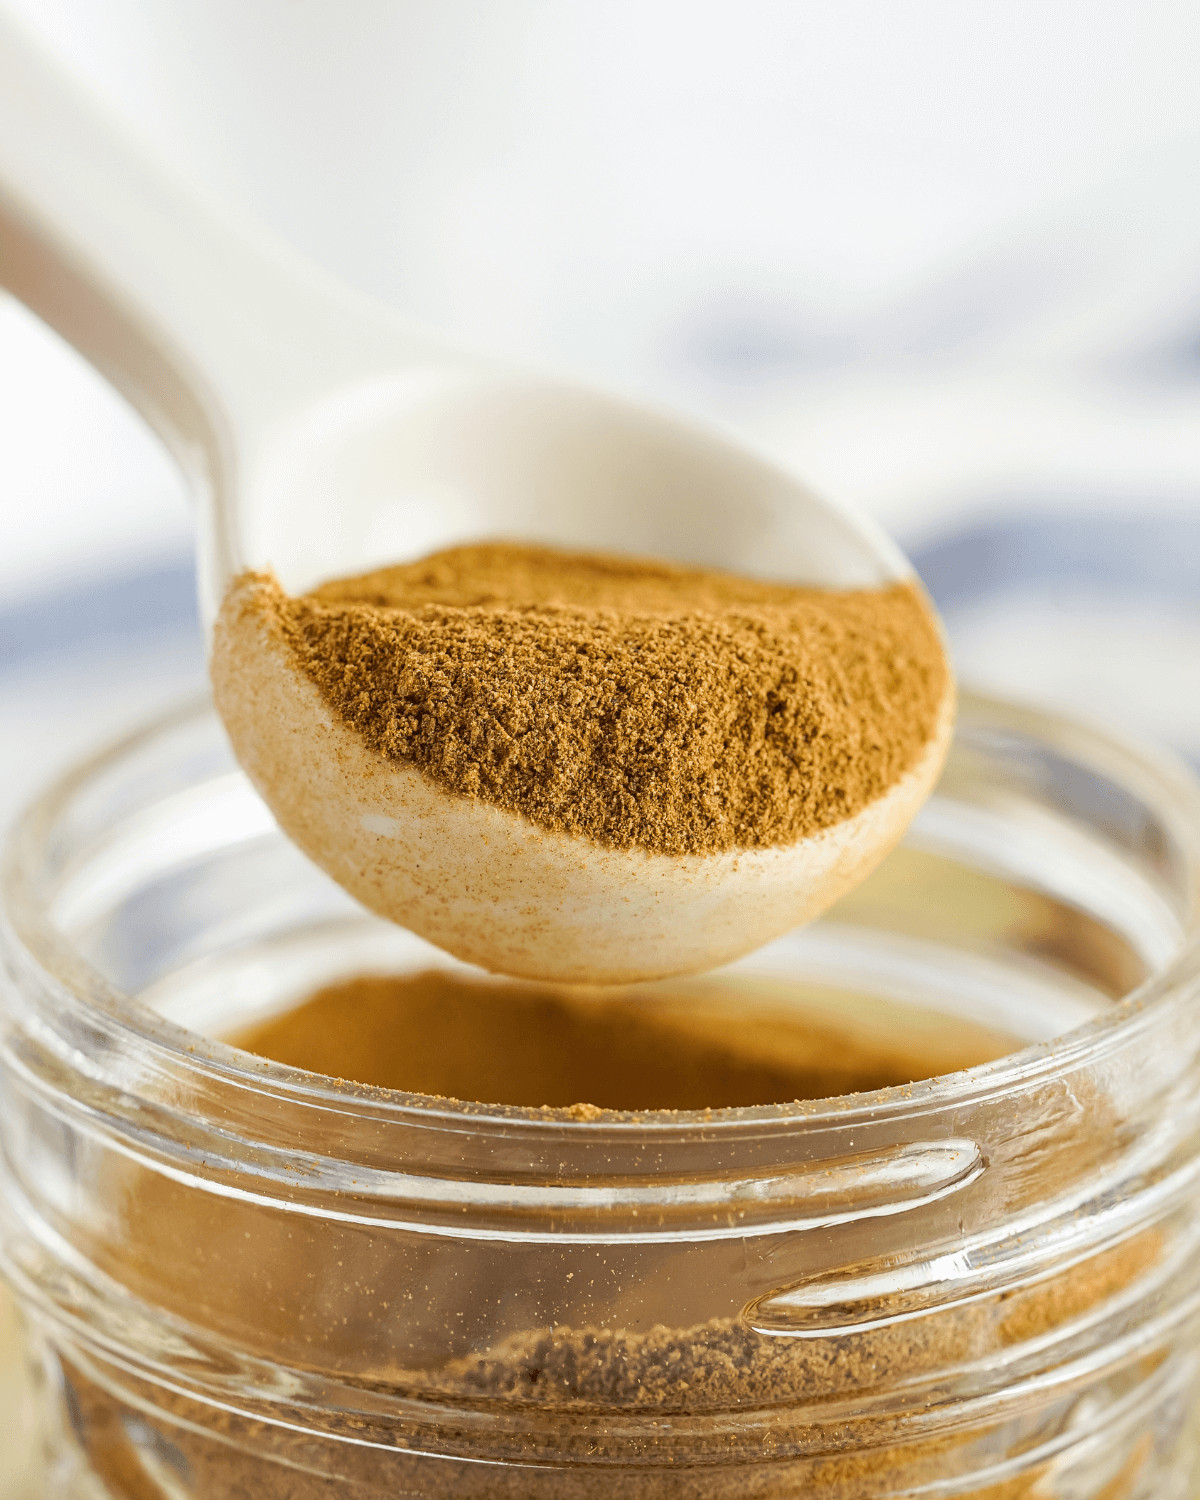 A spoon in the jar of aple pie spice.